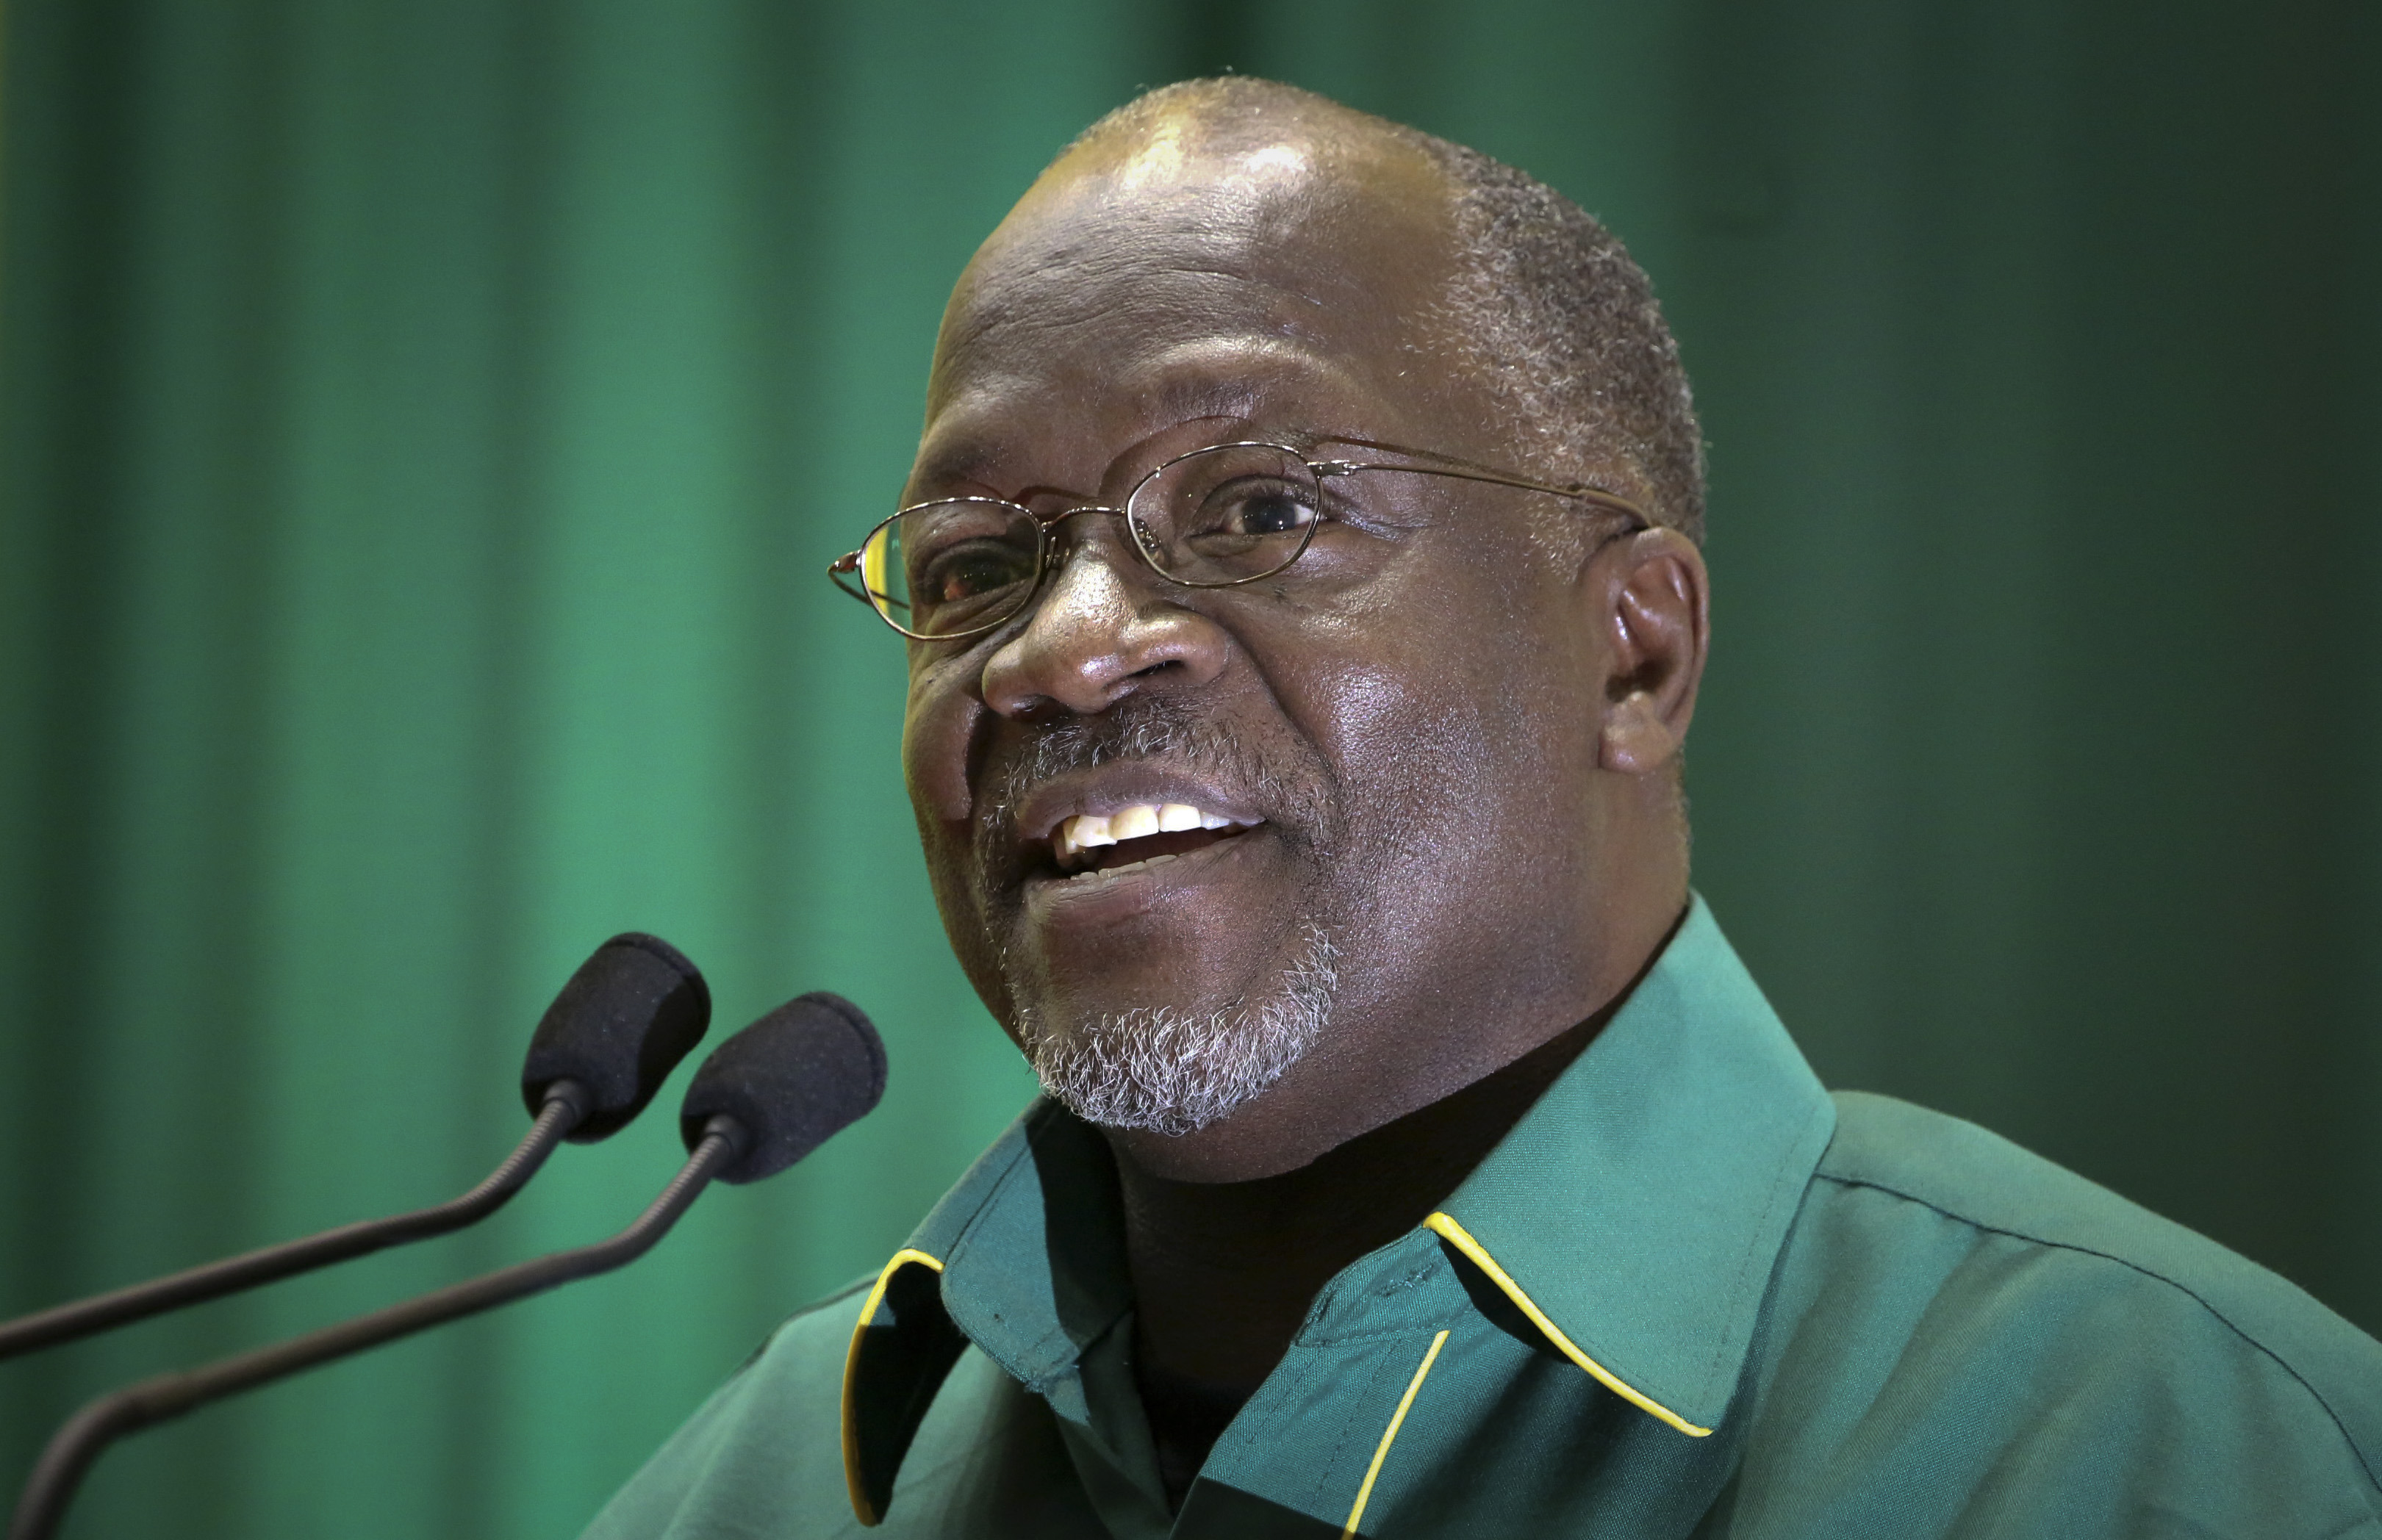 Tanzanian President Comes Under Fire for Pardoning Child Rapists